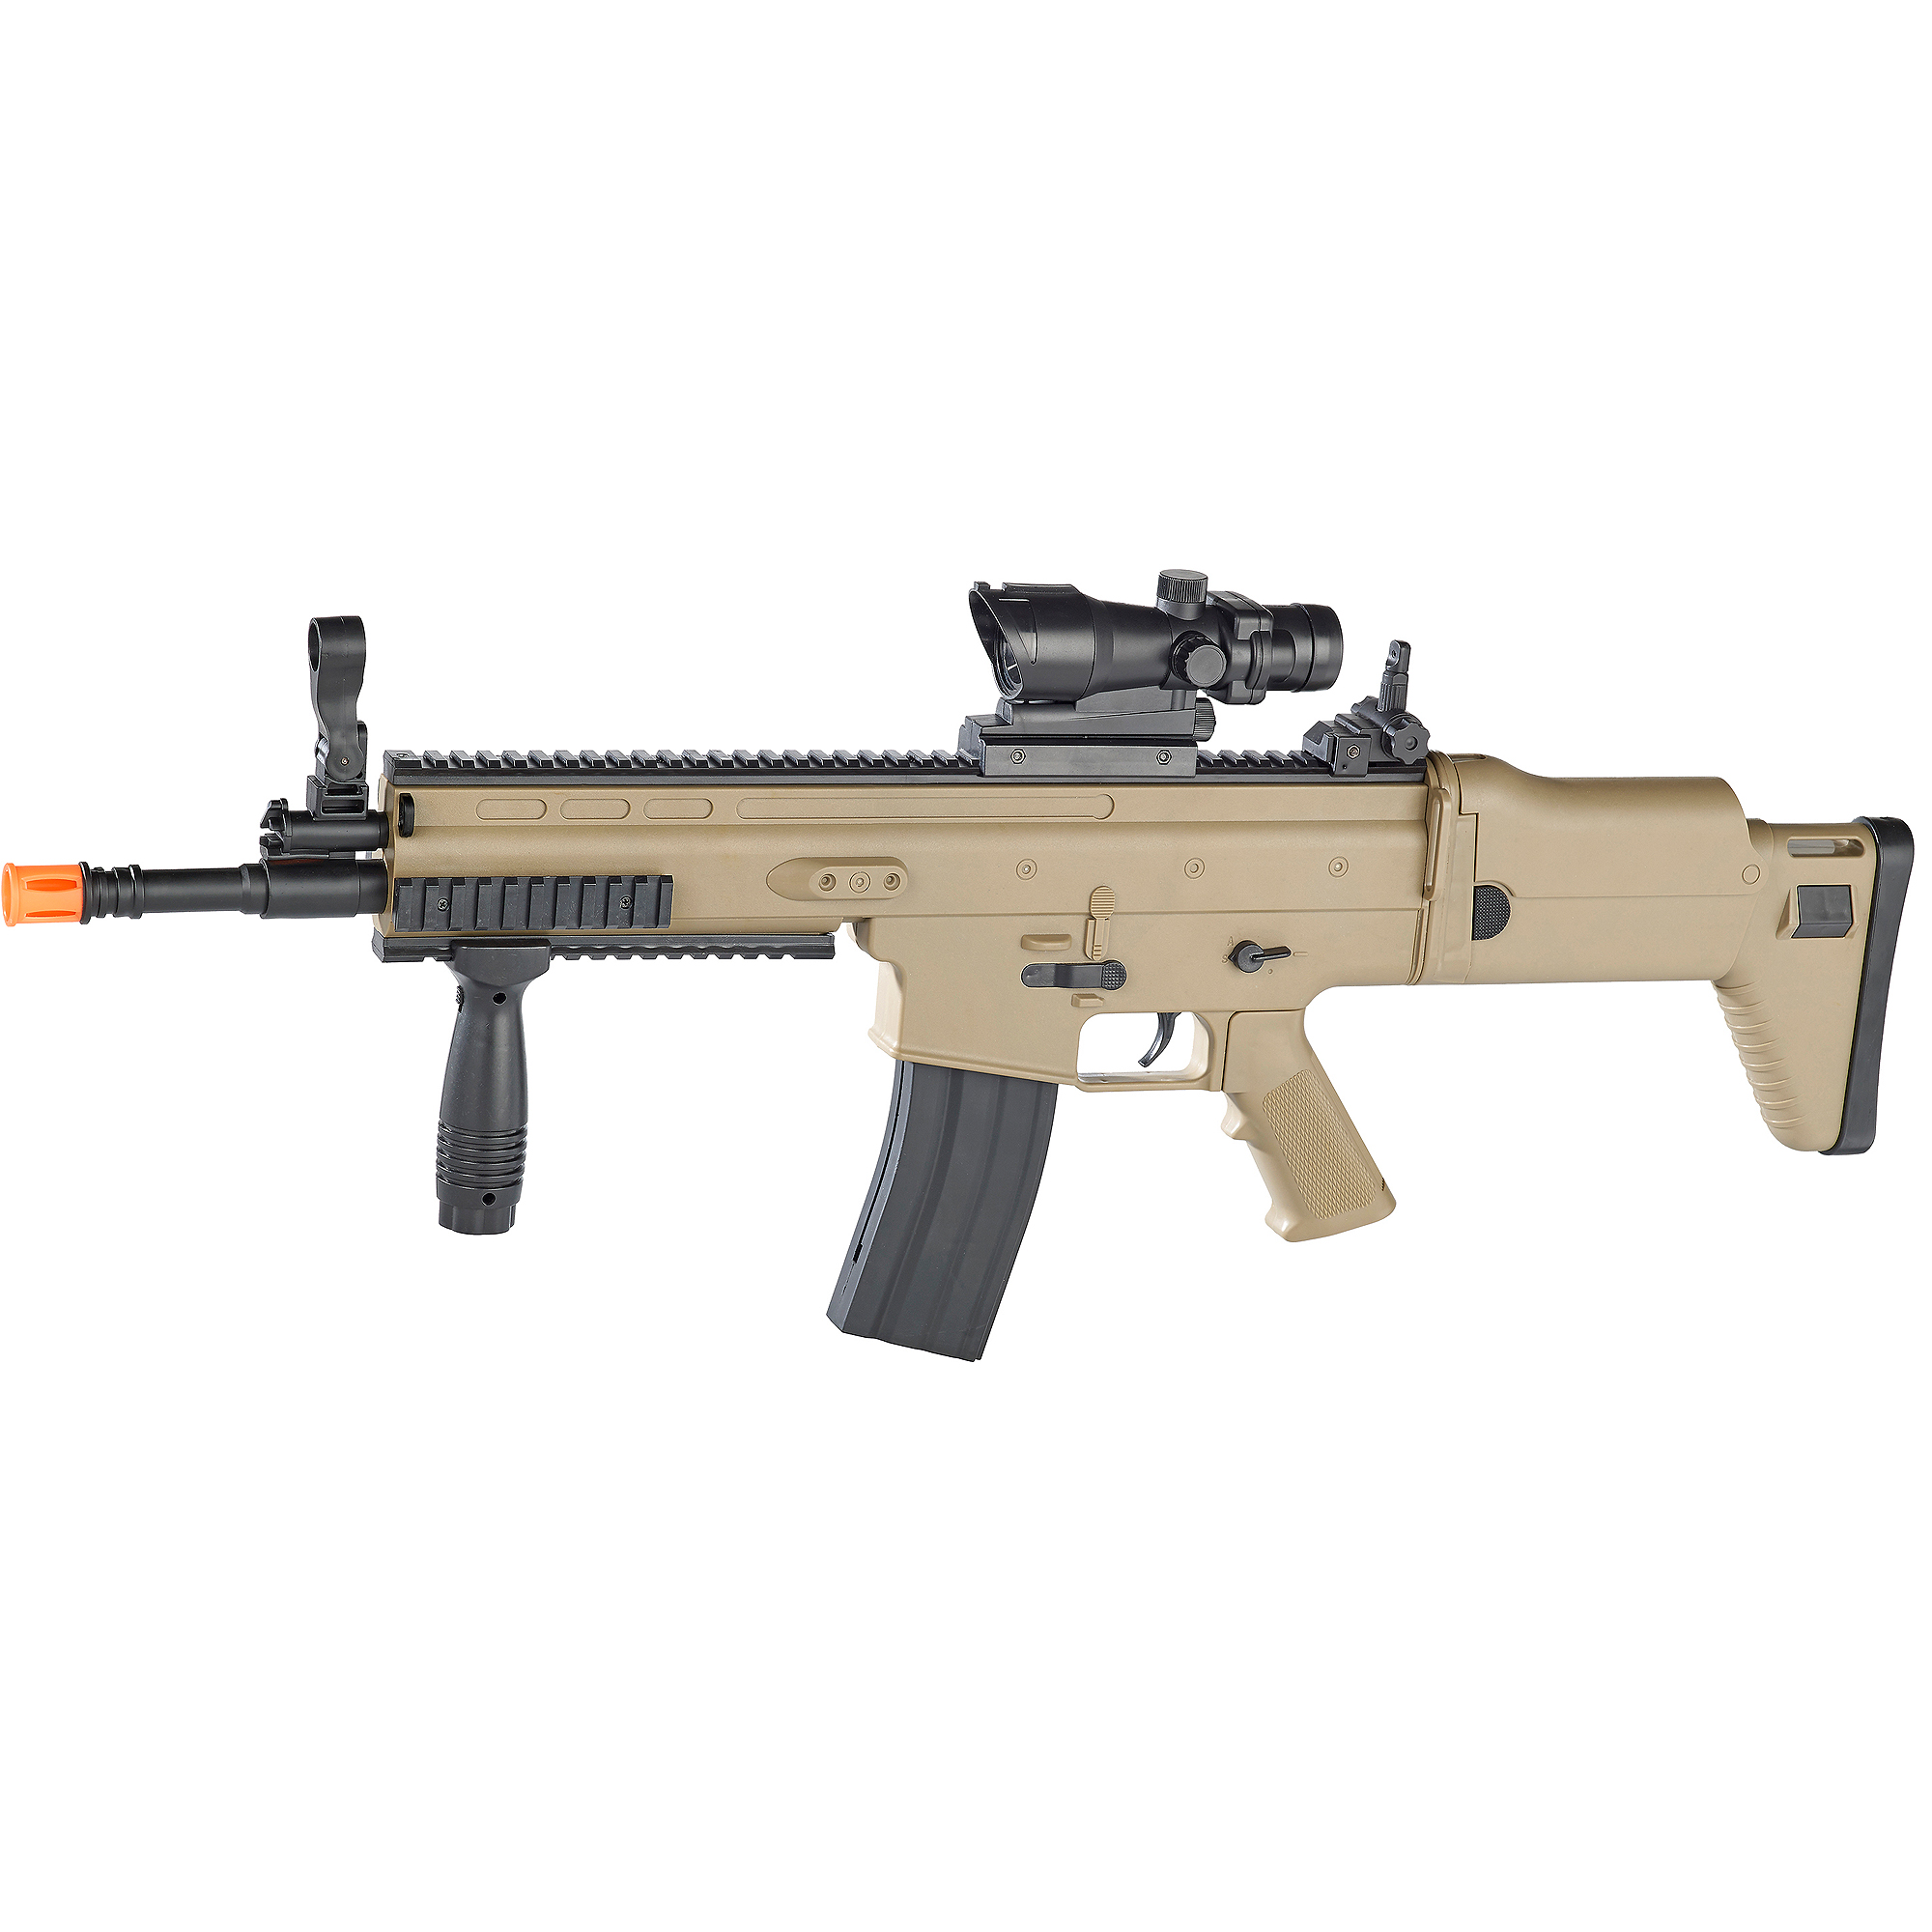 Images of Fn Scar-l Rifle | 2000x2000